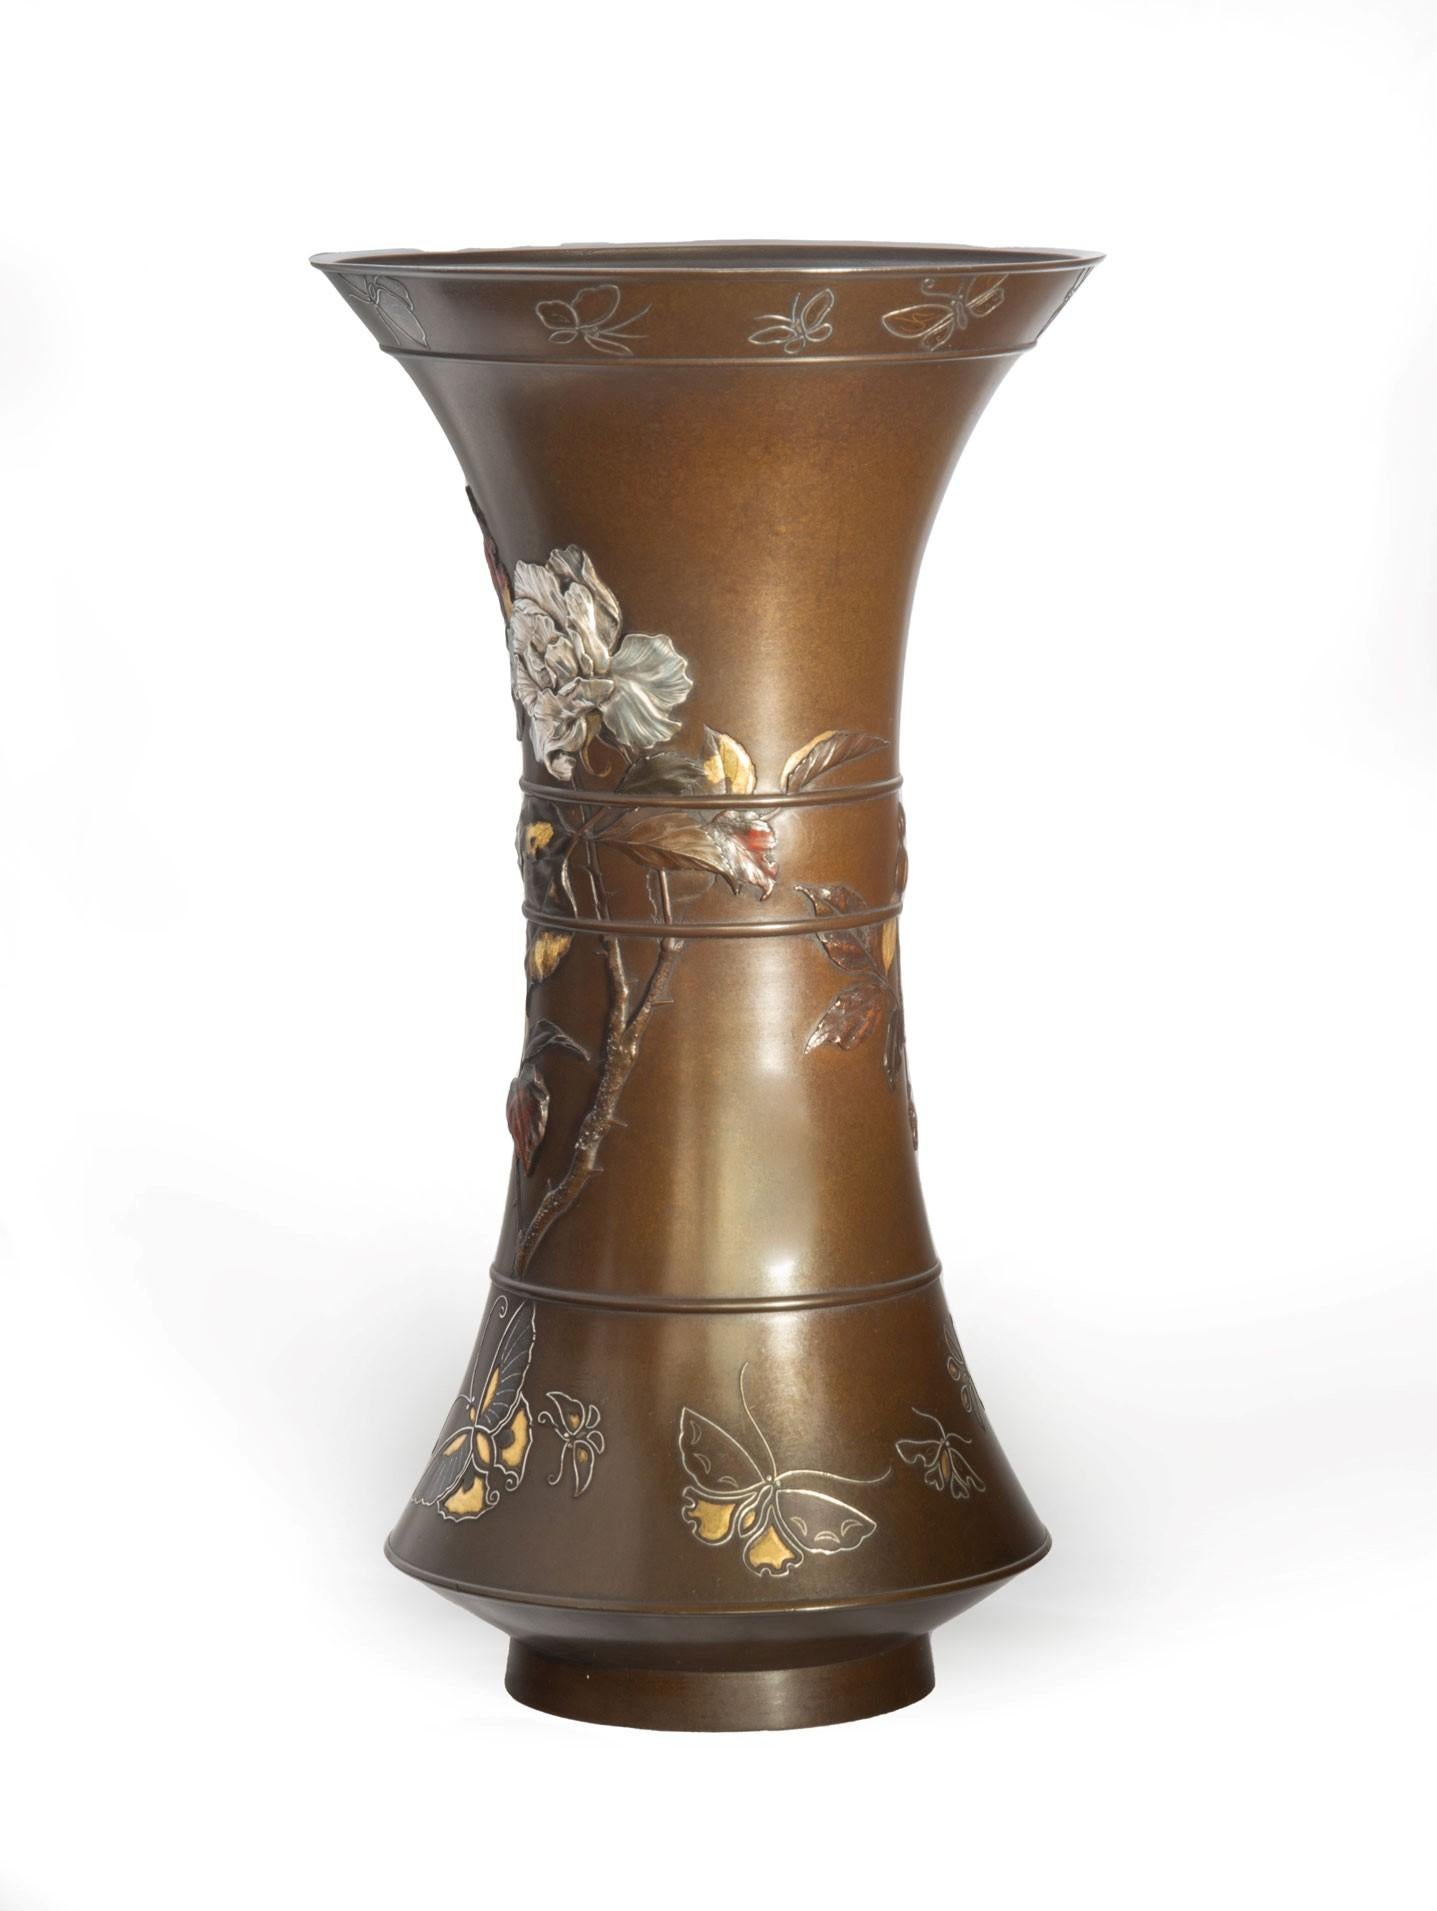 As part of our Japanese works of art collection we are delighted to offer this fine quality Meiji Period (1868-1912) bronze and mixed metal vase by the highly skilled Imperial artist Suzuki Chokichi, his art name Kako. On this occasion Chokichi has